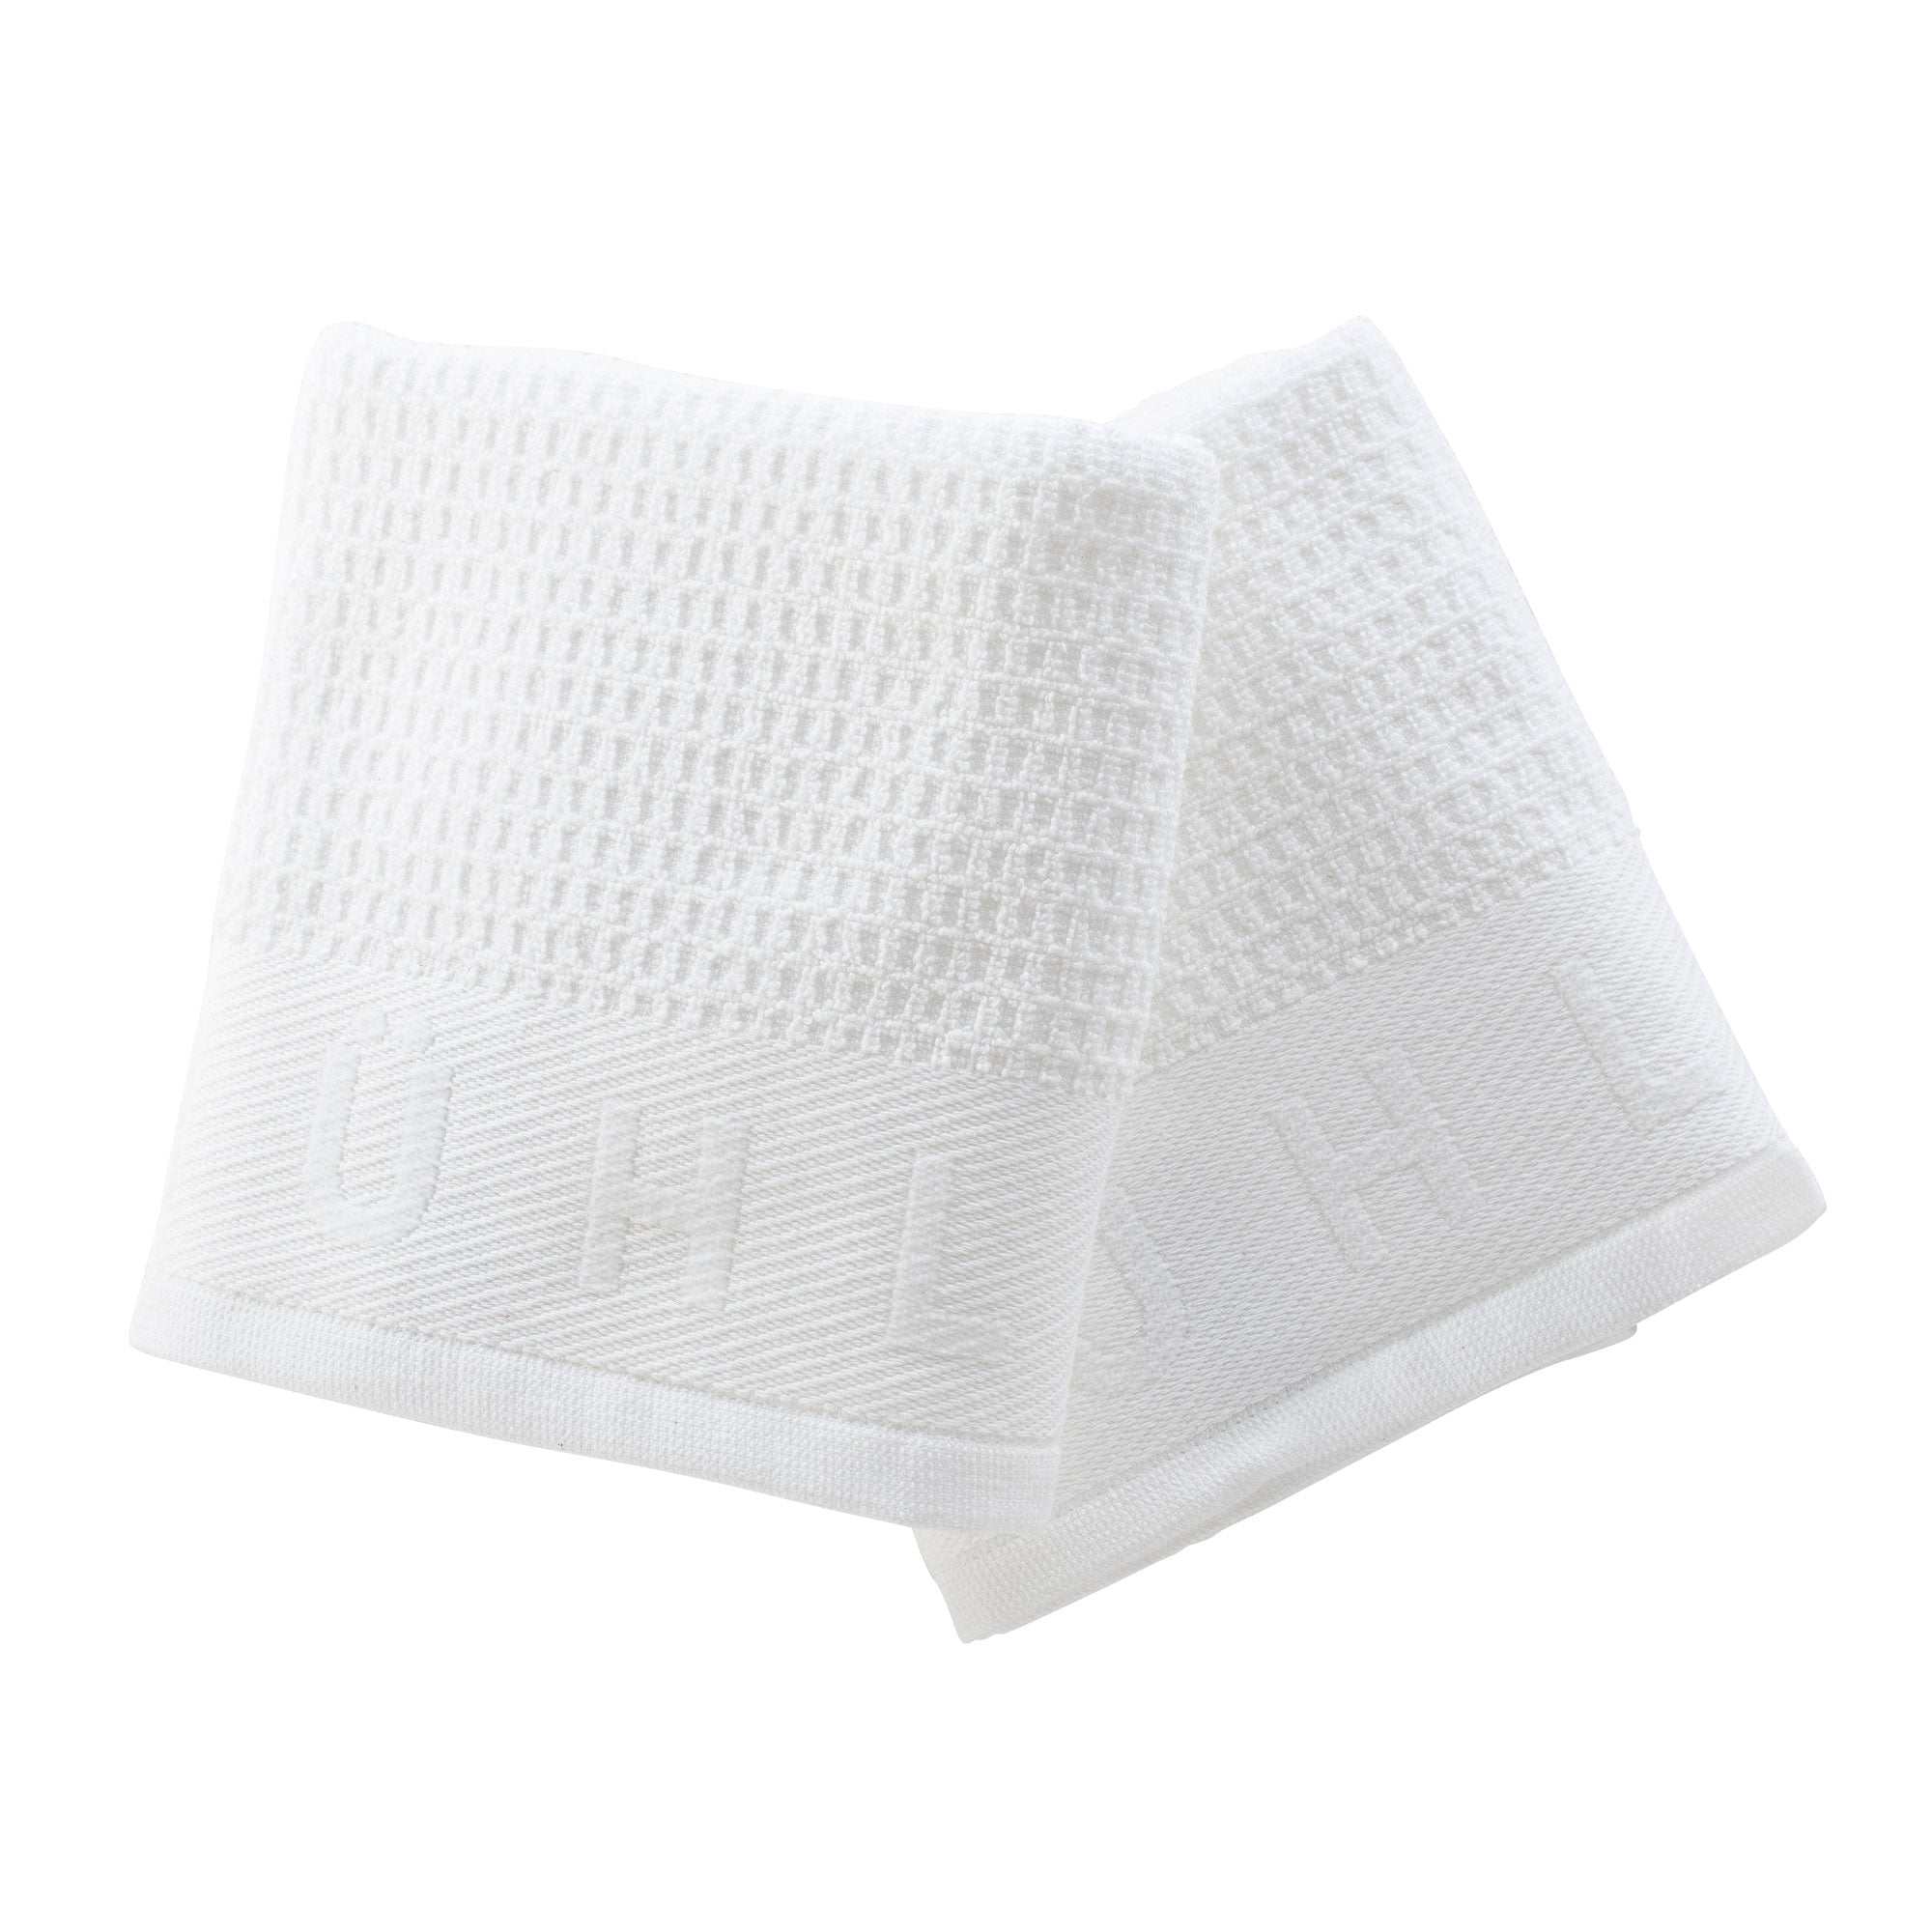 MÜHLE 'Waffle Pique' Shaving Towels, 2-Pack - Alternate View